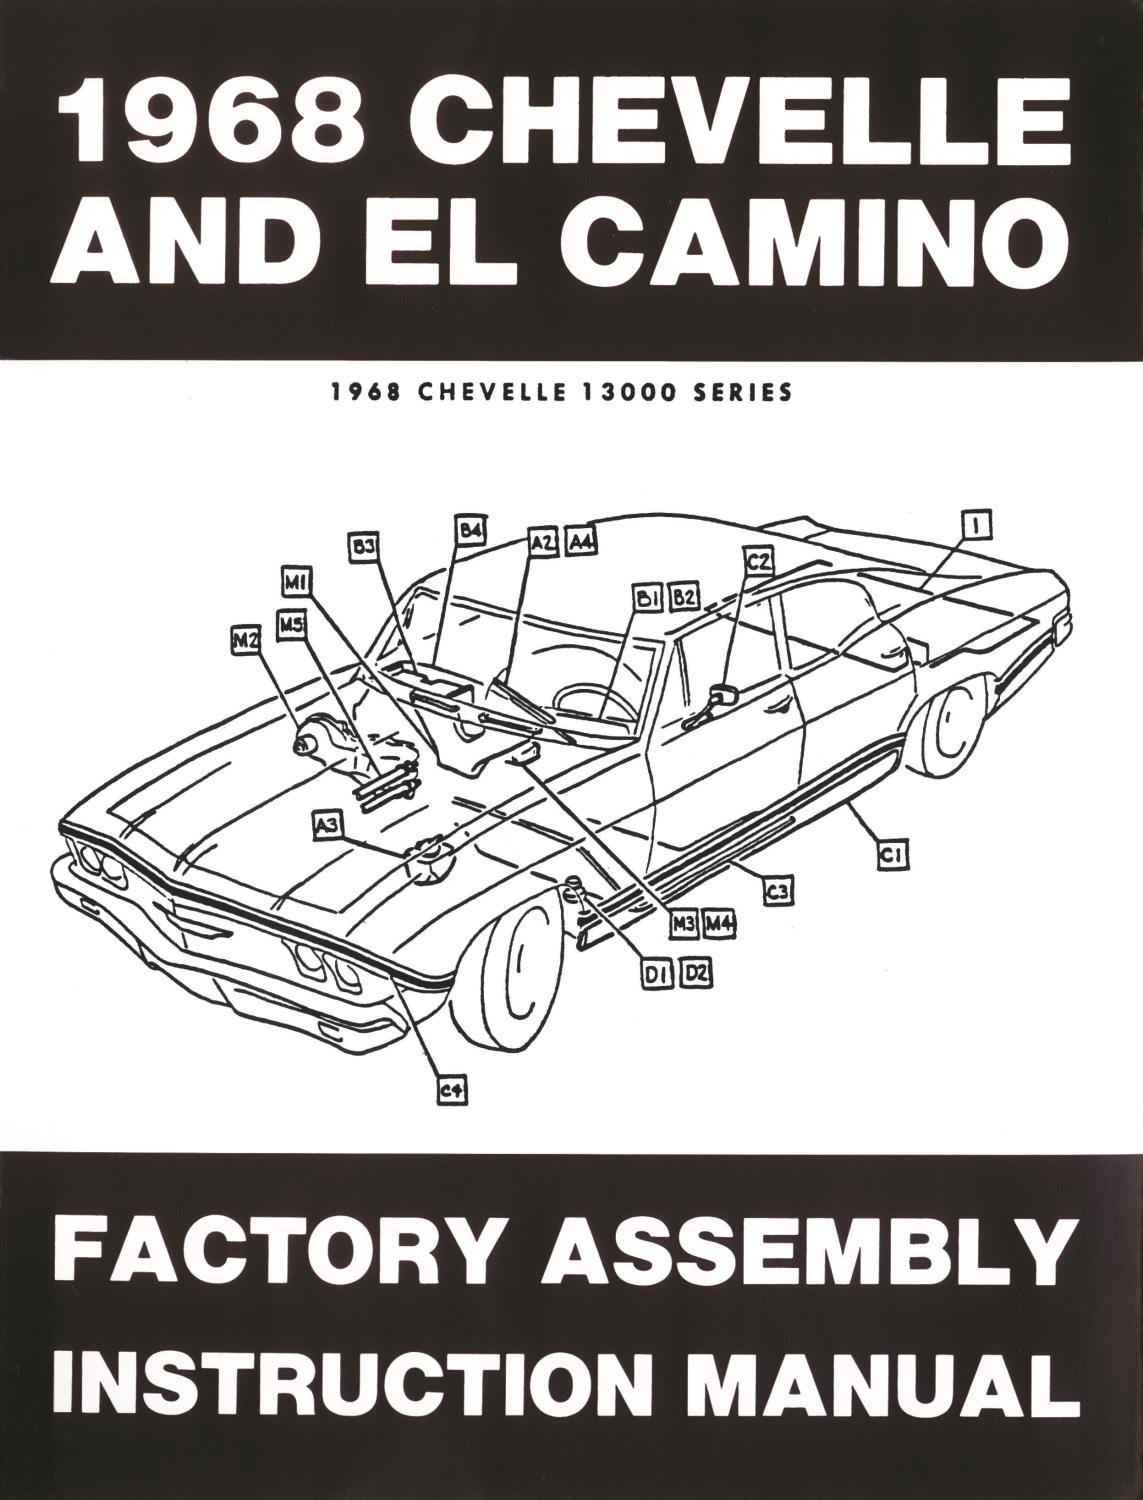 Factory Assembly Instruction Manual for 1968 Chevrolet Chevelle